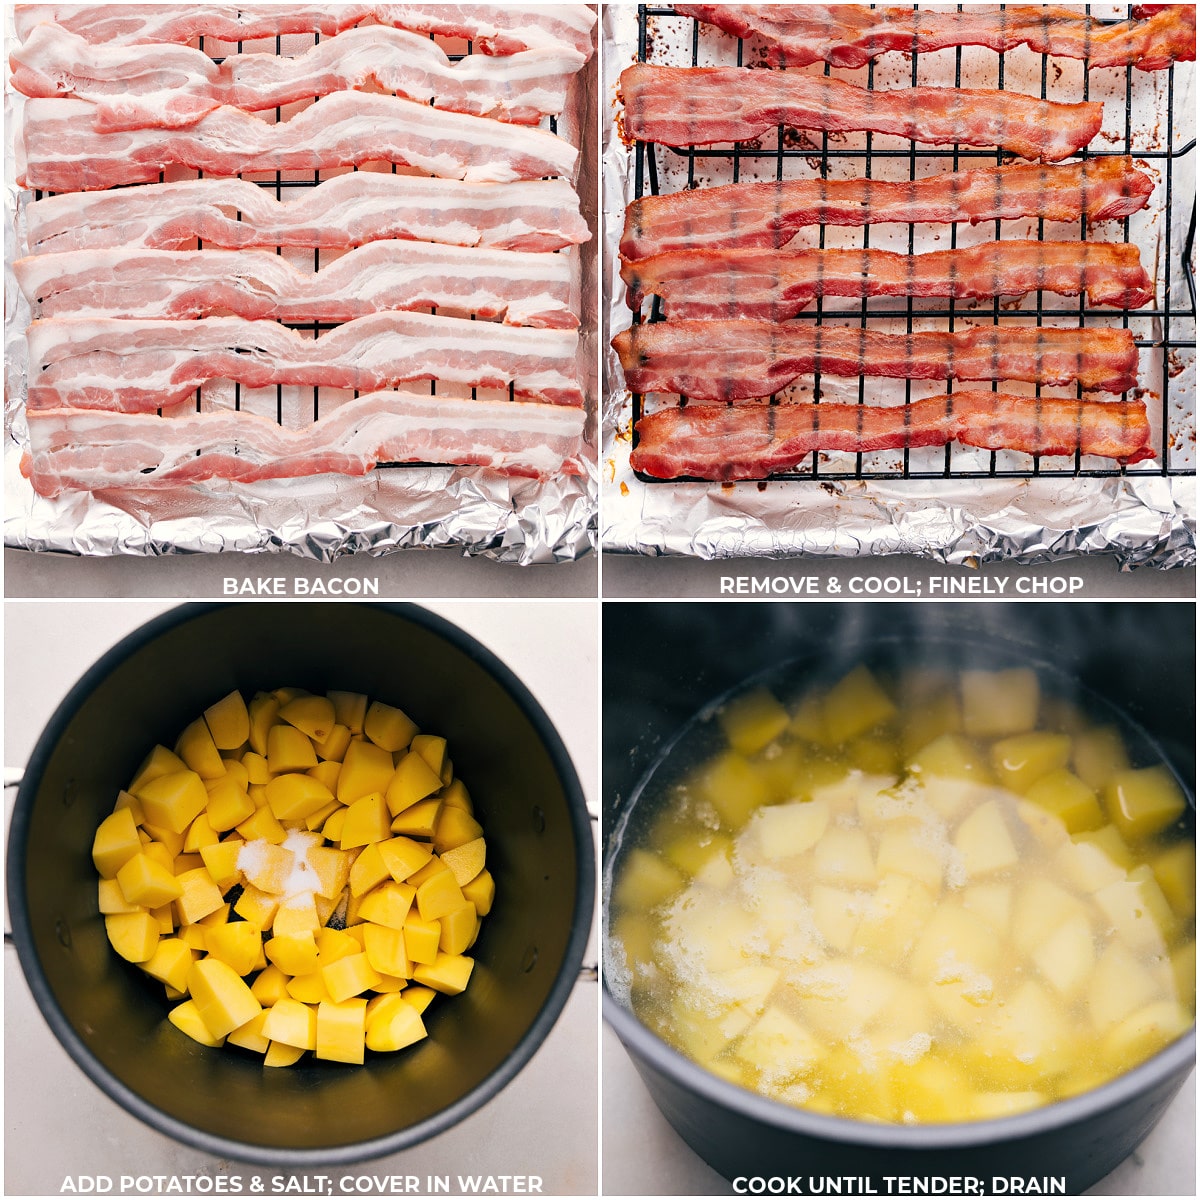 Sizzling bacon strips in a hot skillet and potatoes simmering in a pan for Twice-Baked Potato Casserole.